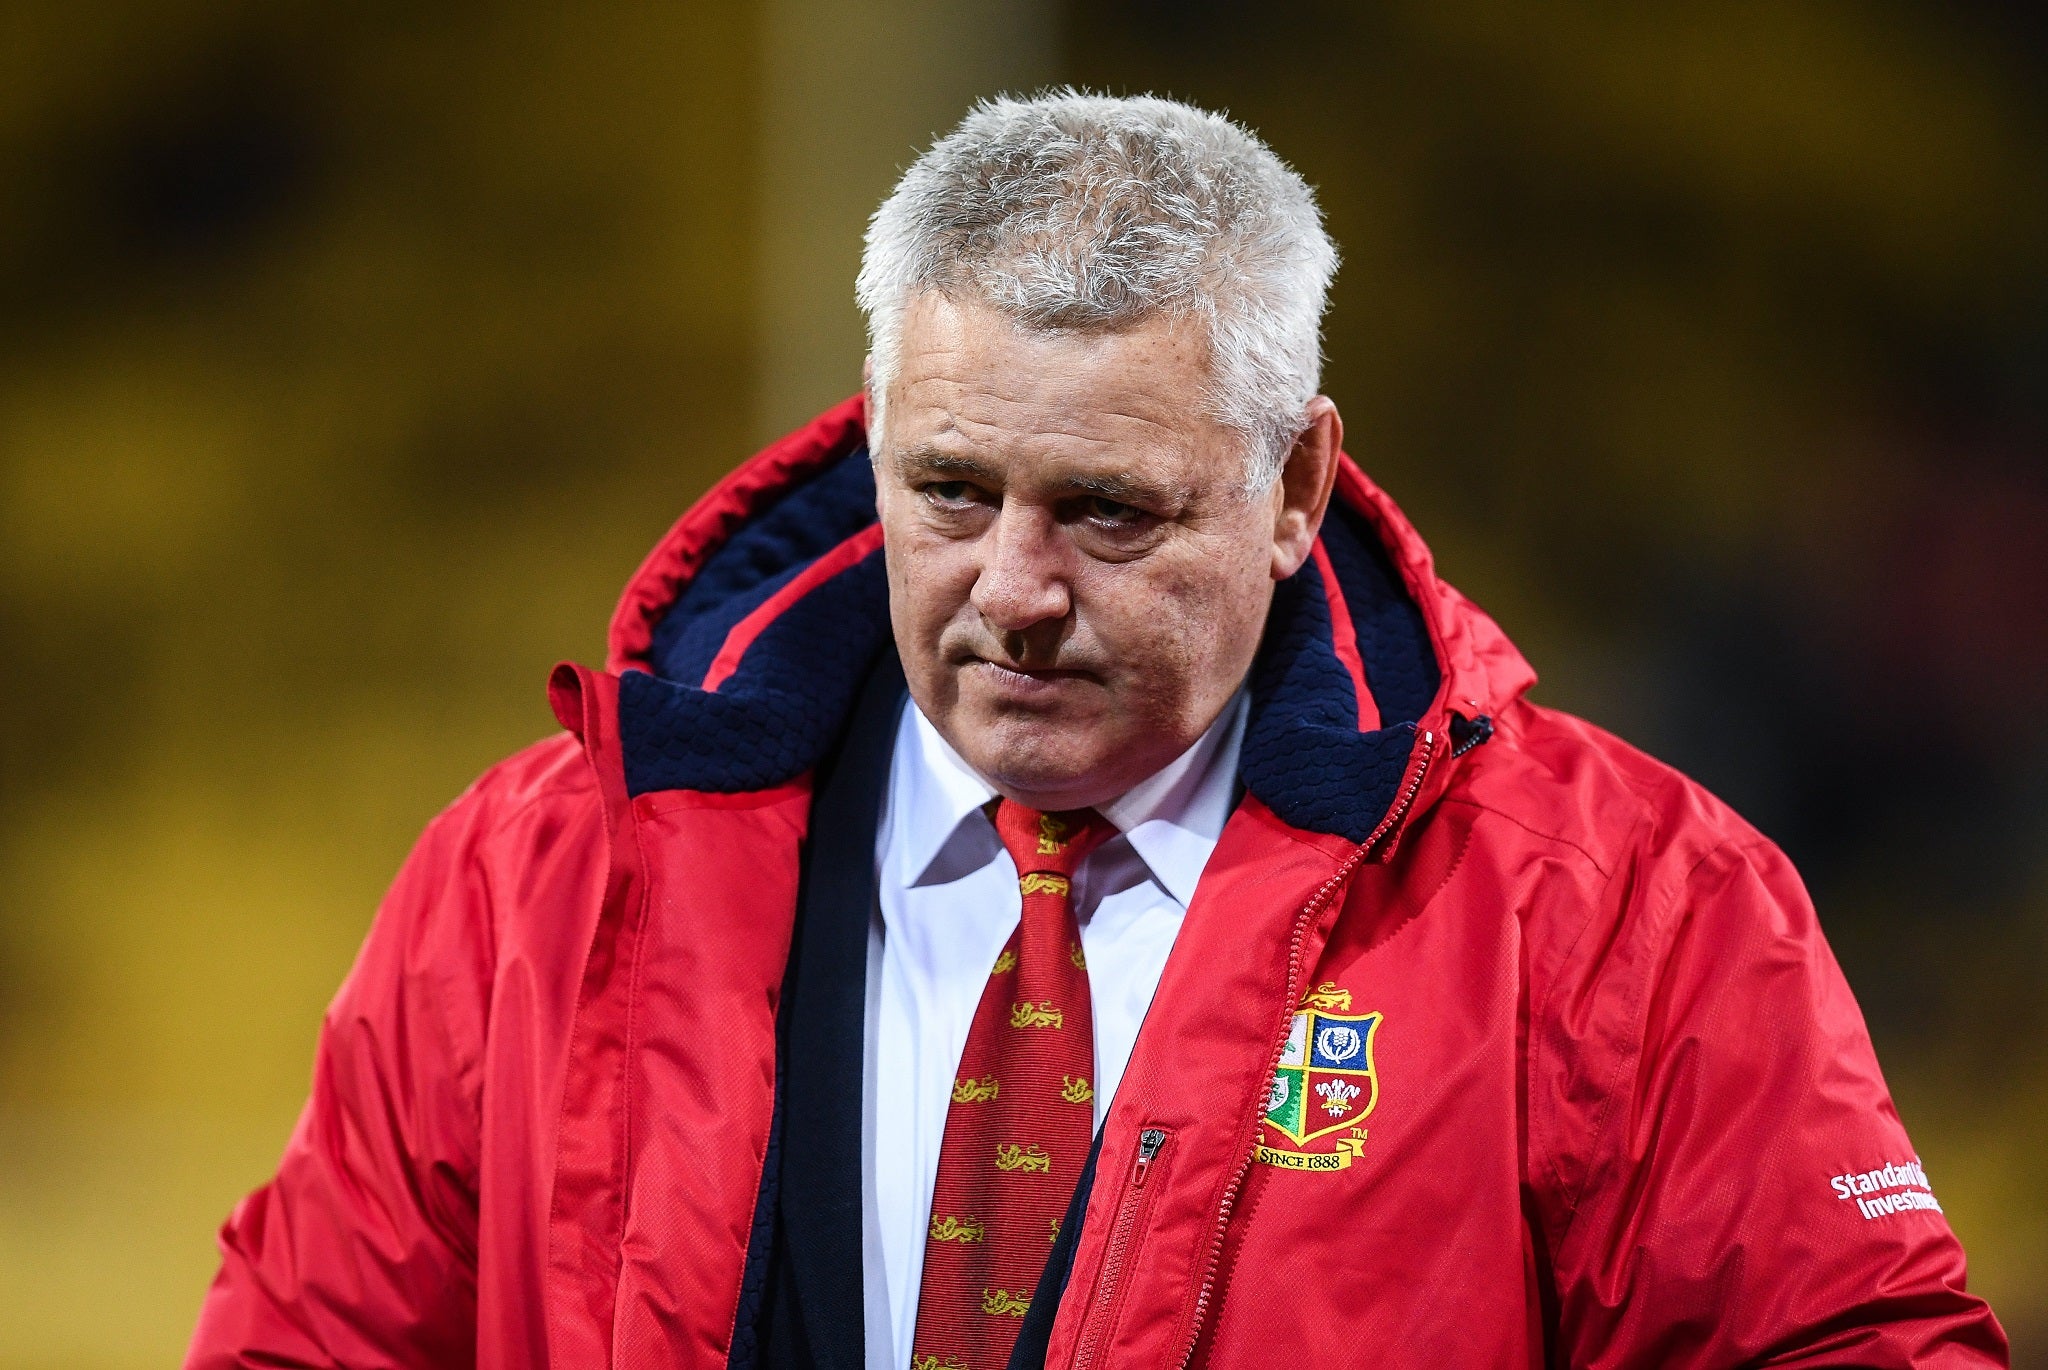 Warren Gatland decided not to use the six players he called up during the Lions tour